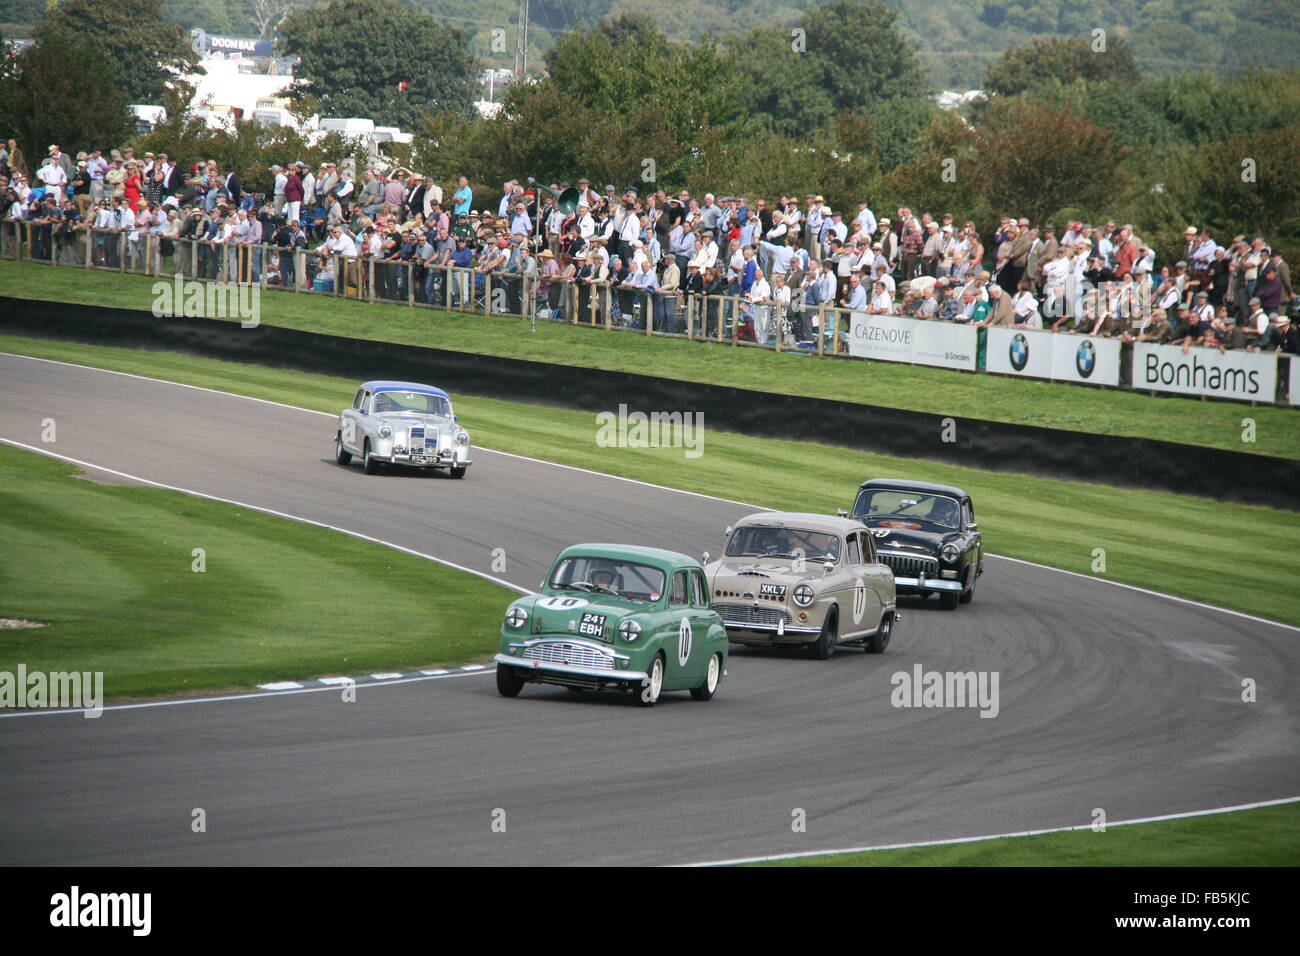 VINTAGE RACING CARS AT THE GOODWOOD REVIVAL Stock Photo